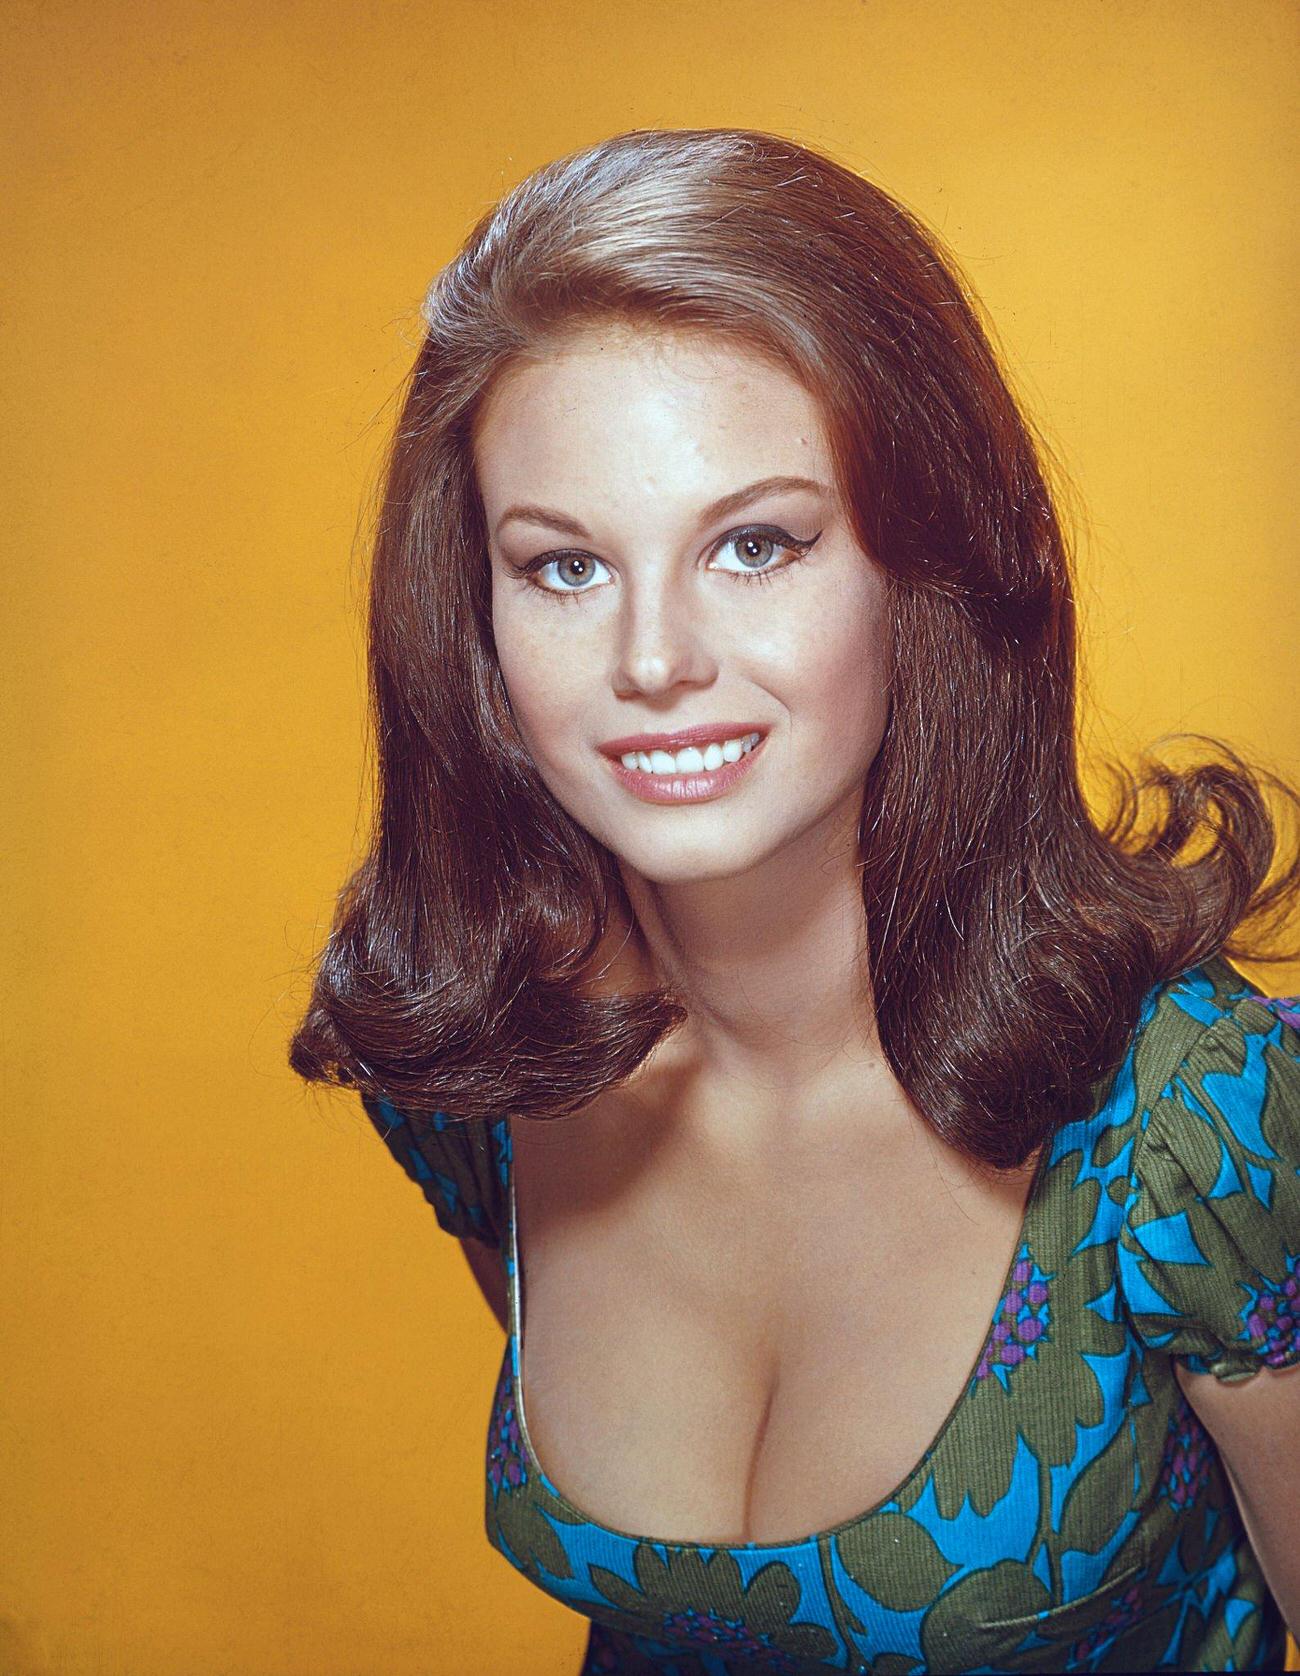 LANA WOOD 1972 A PLACE CALLED TODAY busty sweater girl color 7x10 portrait